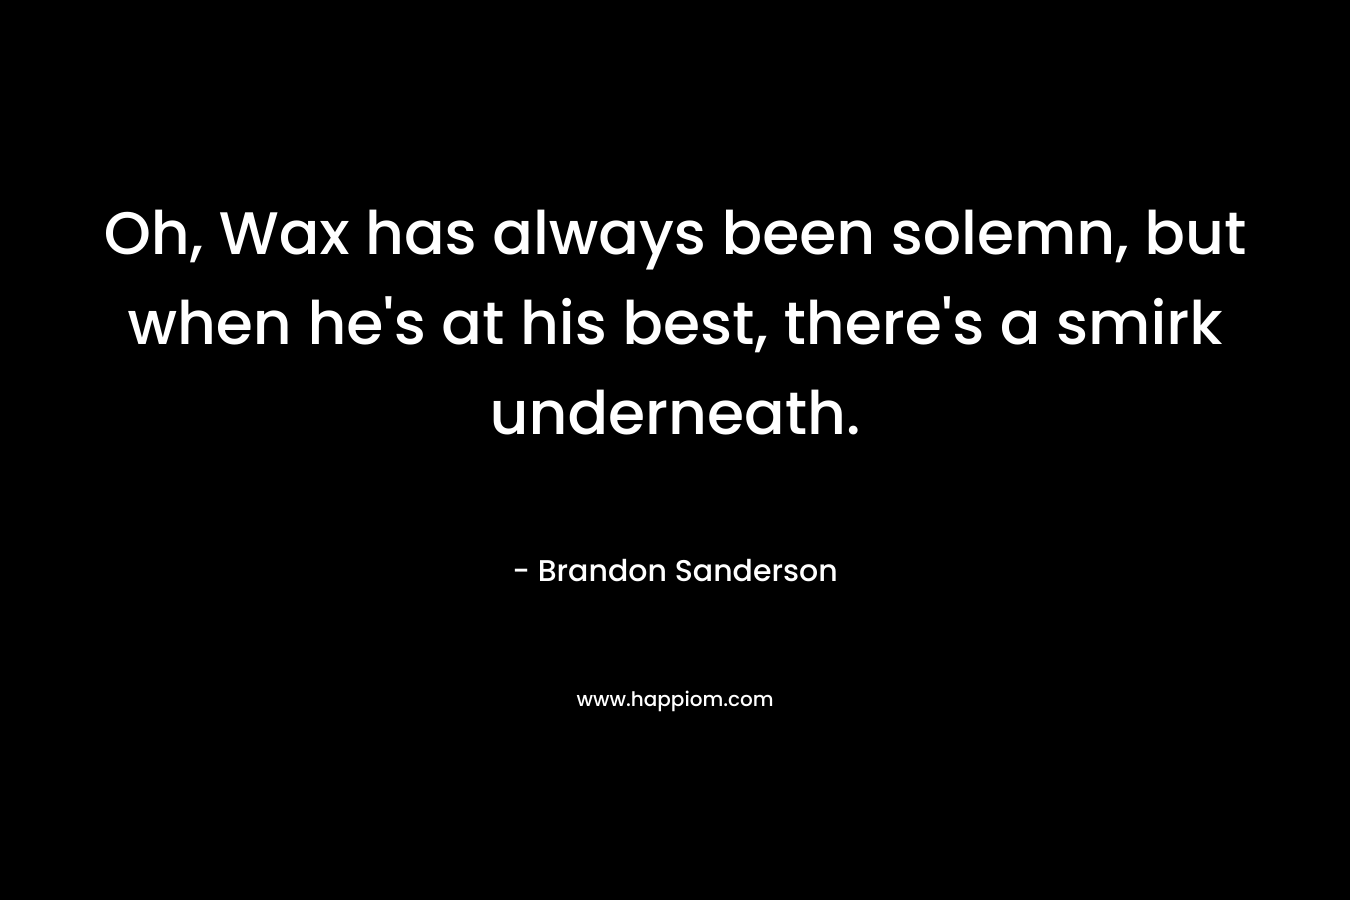 Oh, Wax has always been solemn, but when he’s at his best, there’s a smirk underneath. – Brandon Sanderson